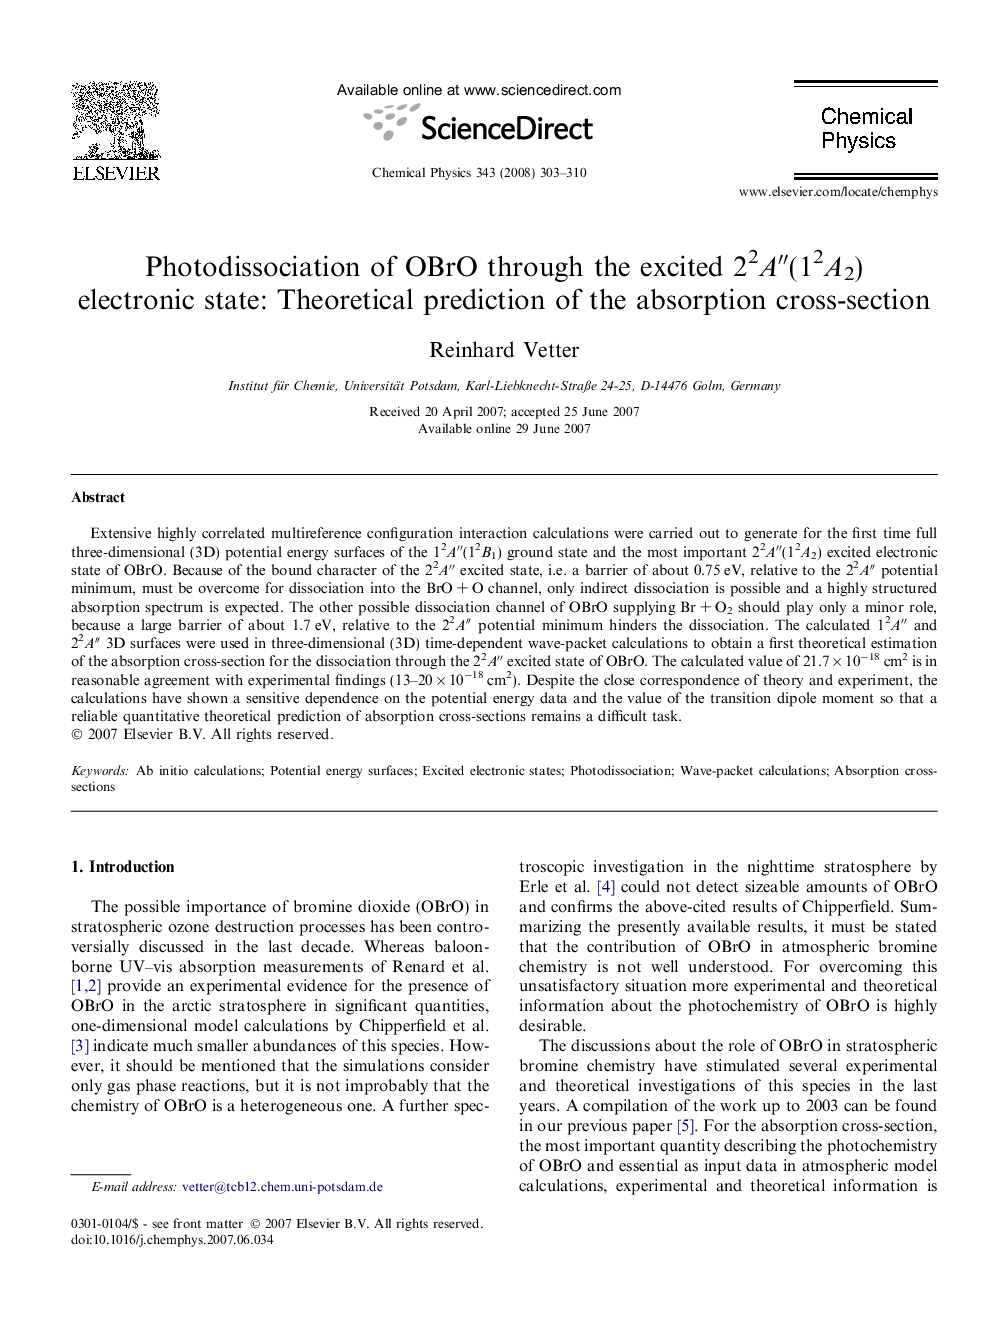 Photodissociation of OBrO through the excited 22Aâ³(12A2) electronic state: Theoretical prediction of the absorption cross-section